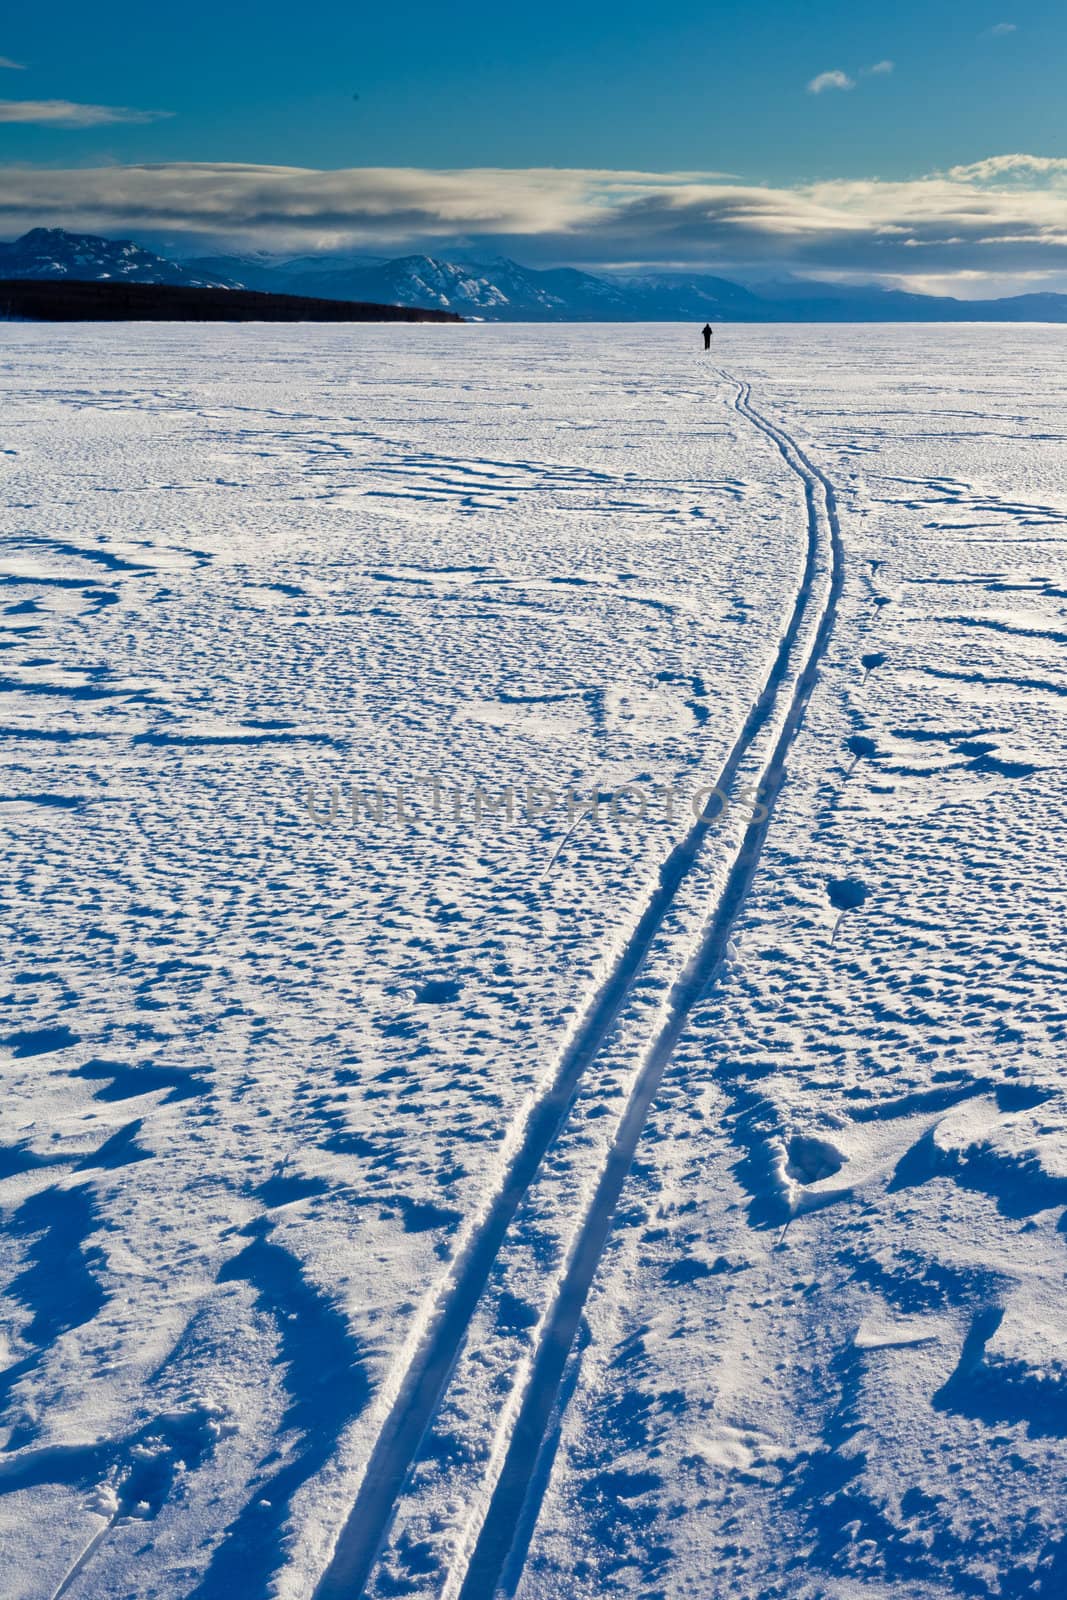 A person skiing leaving long ski tracks behind on vast surface of frozen Lake Laberge, Yukon Territory, Canada